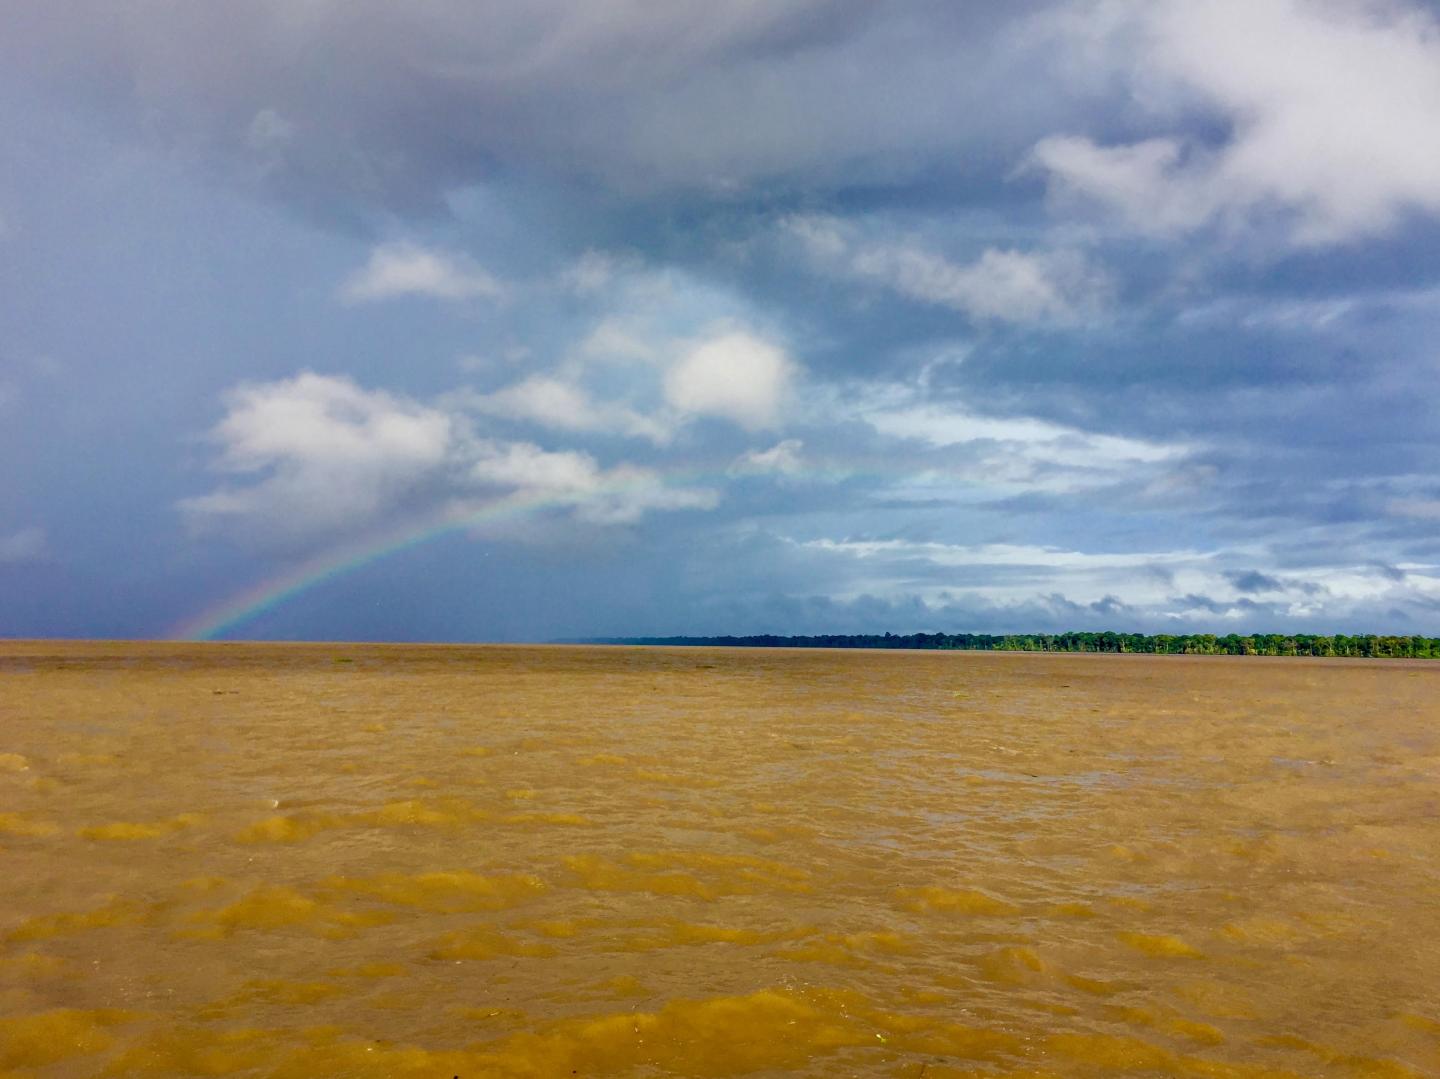 The Southern Channel of the Amazon River near Macapá during High Water